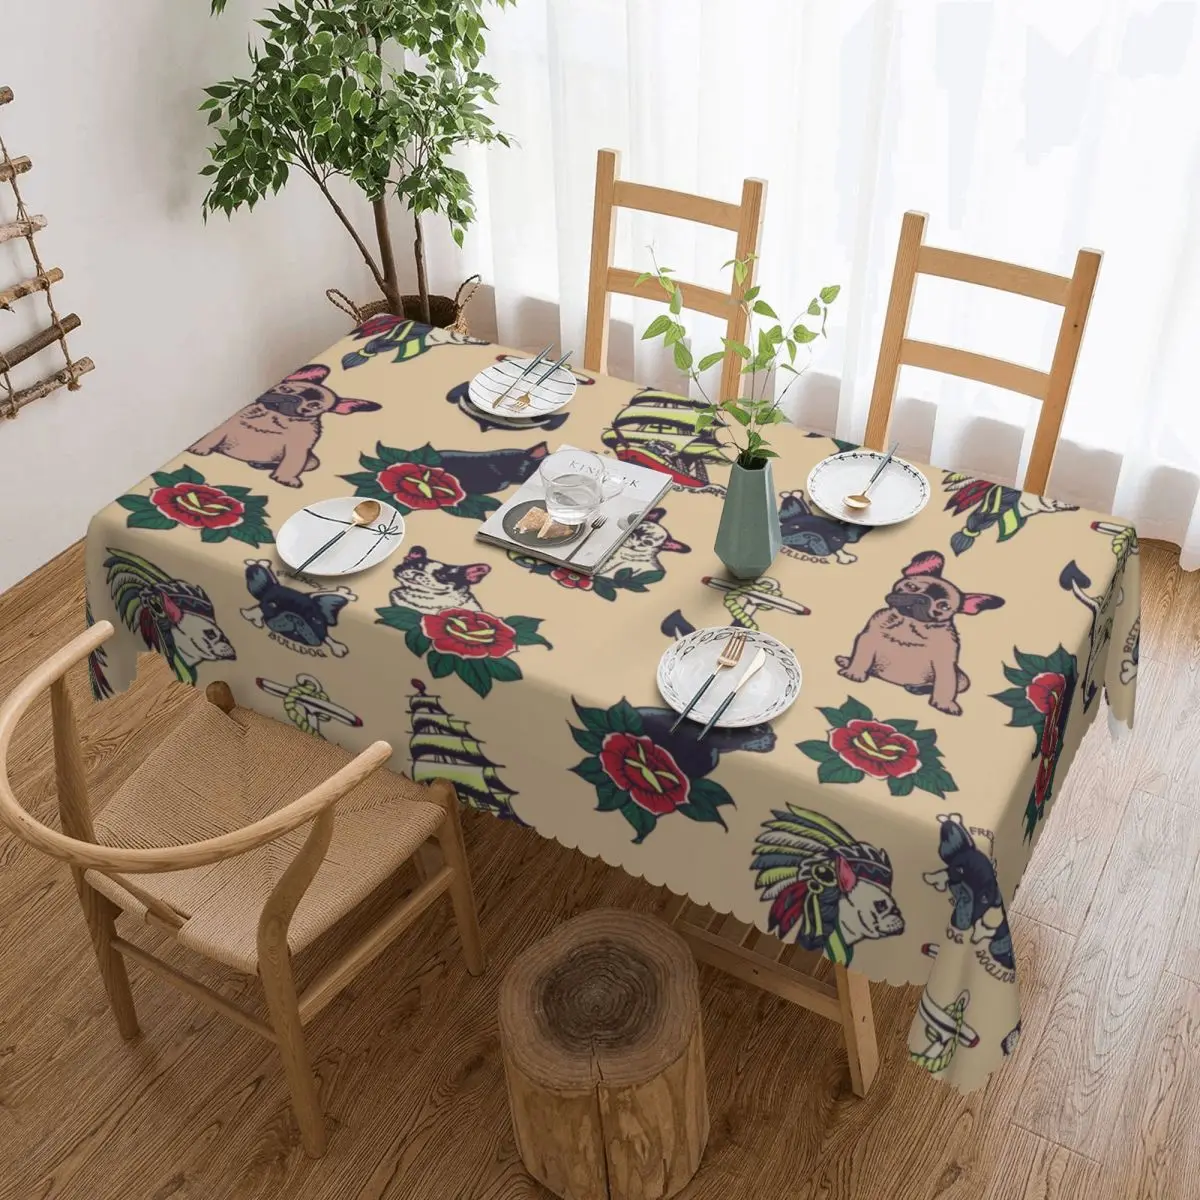 

French Bulldog Tattoo Tablecloth Rectangular Waterproof Animal Frenchie Dog Lover Table Cloth Cover for Kitchen